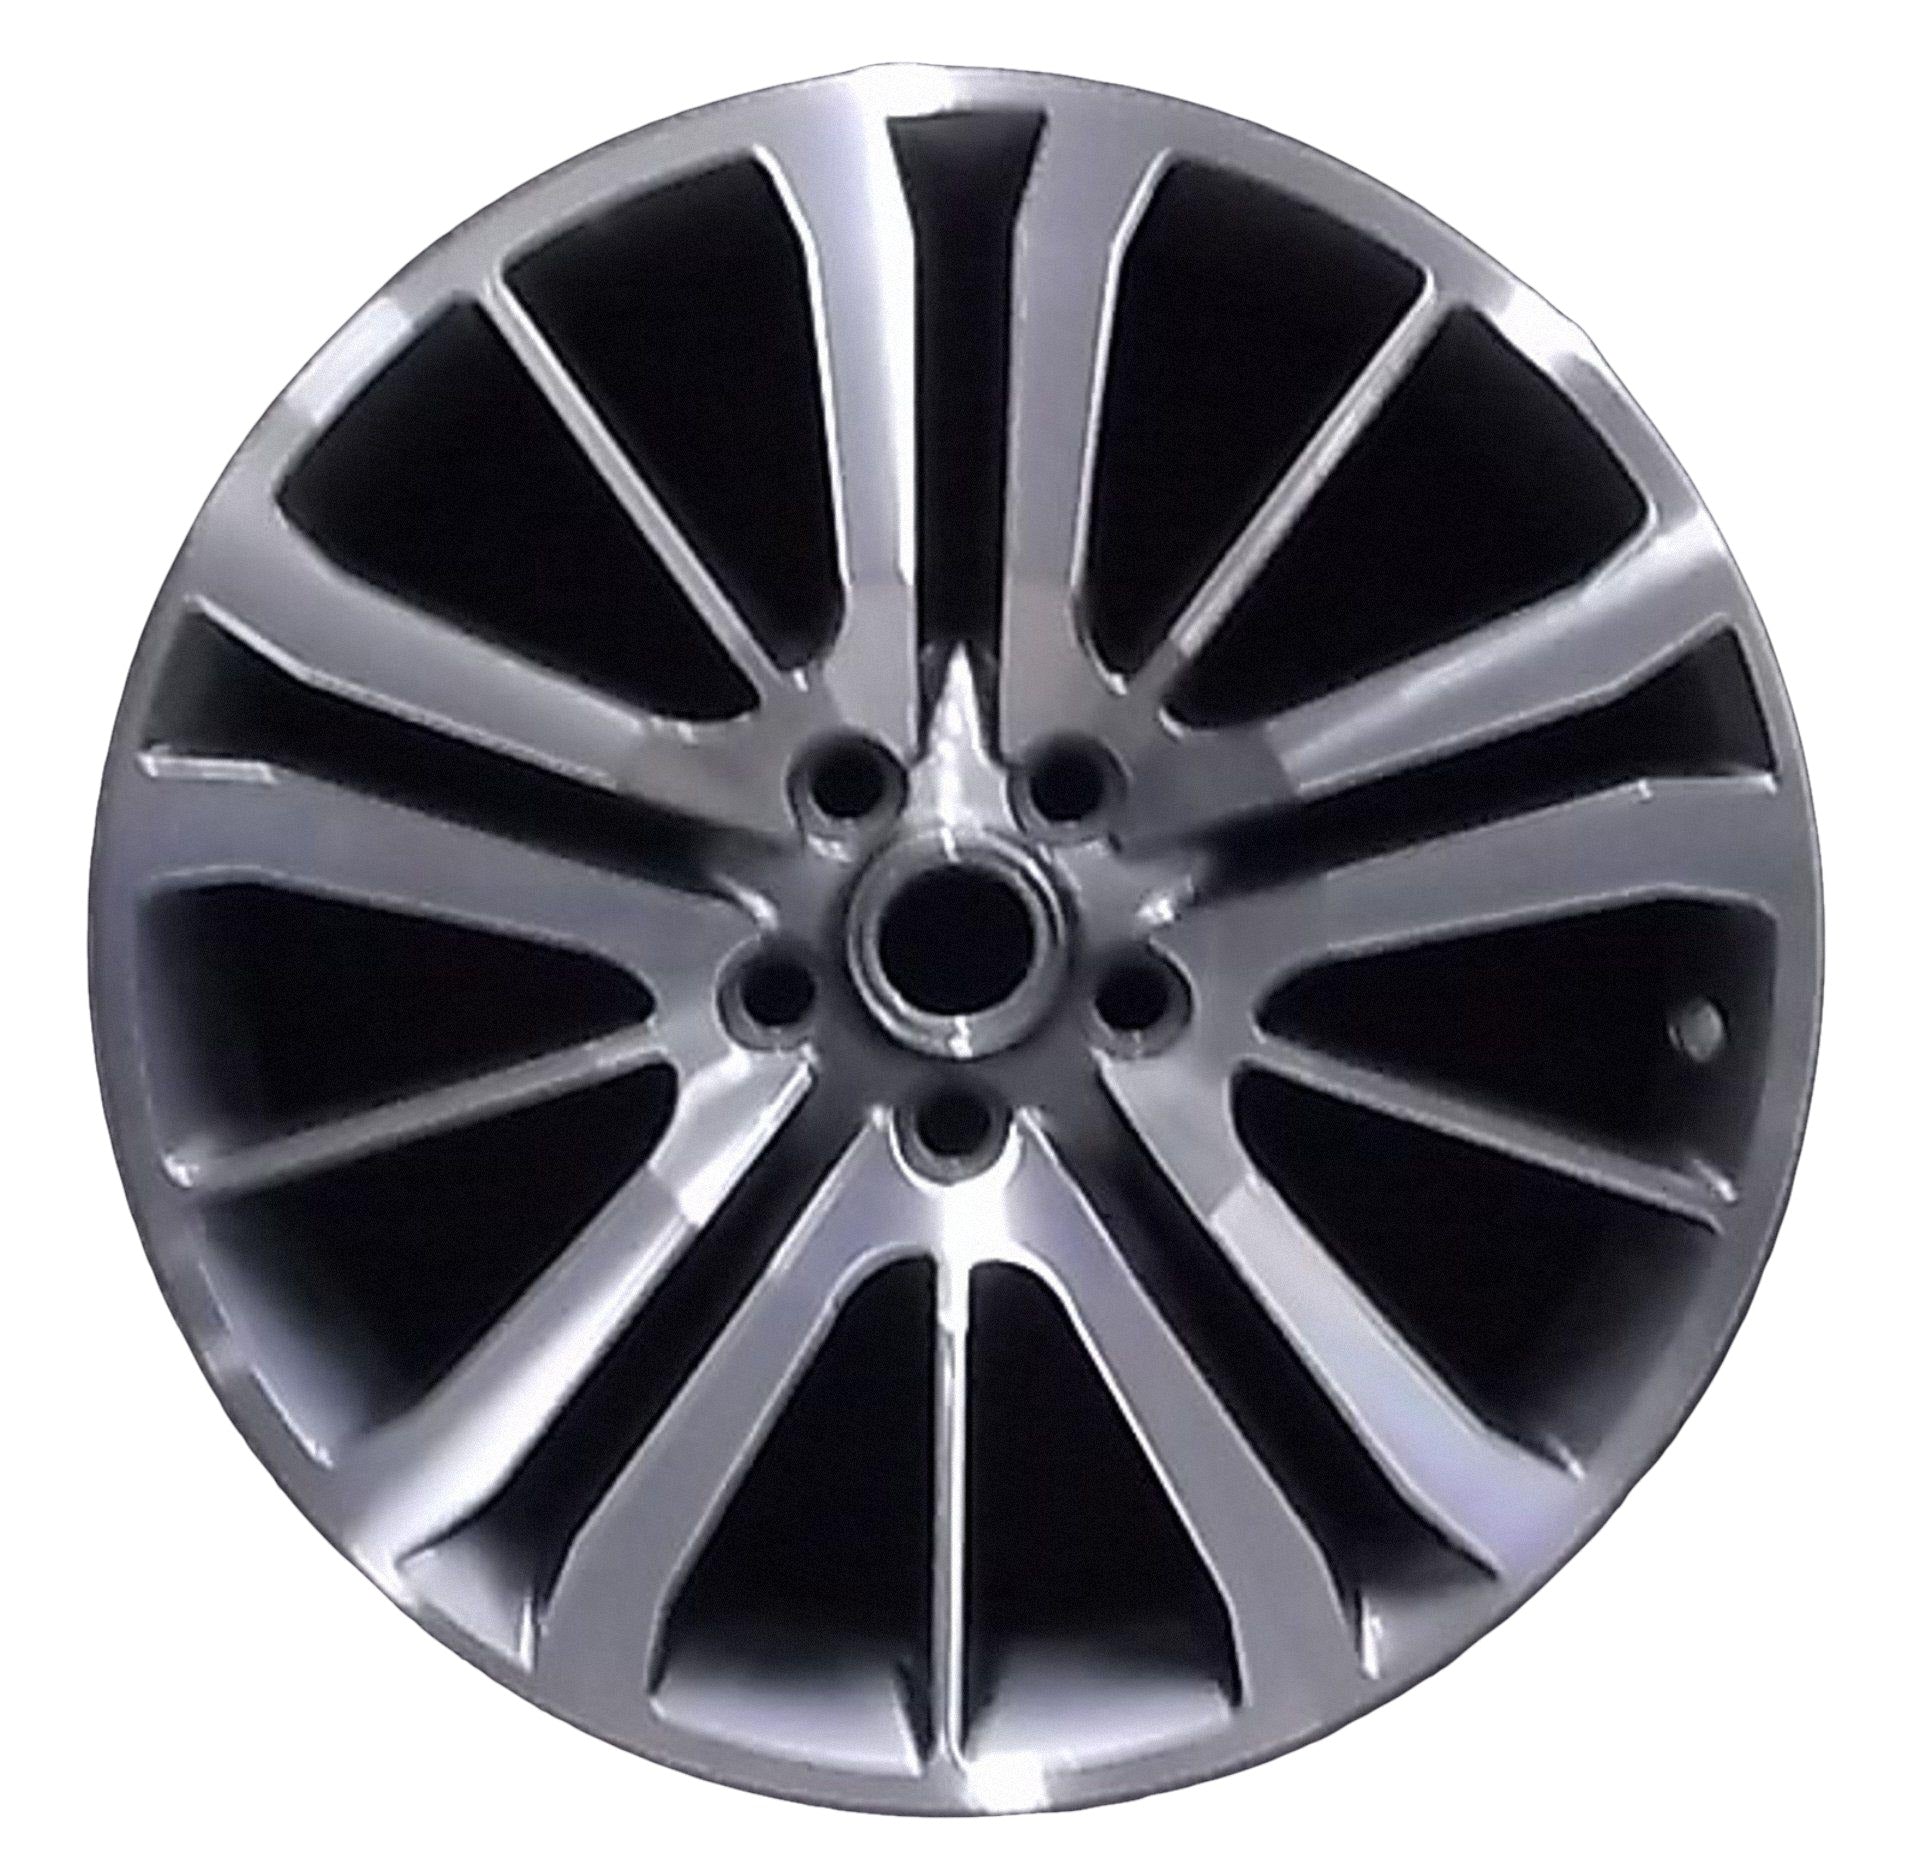 Land Rover Range Rover Sport  2009, 2010, 2011, 2012, 2013 Factory OEM Car Wheel Size 20x9.5 Alloy WAO.72208.LC25.MABRT